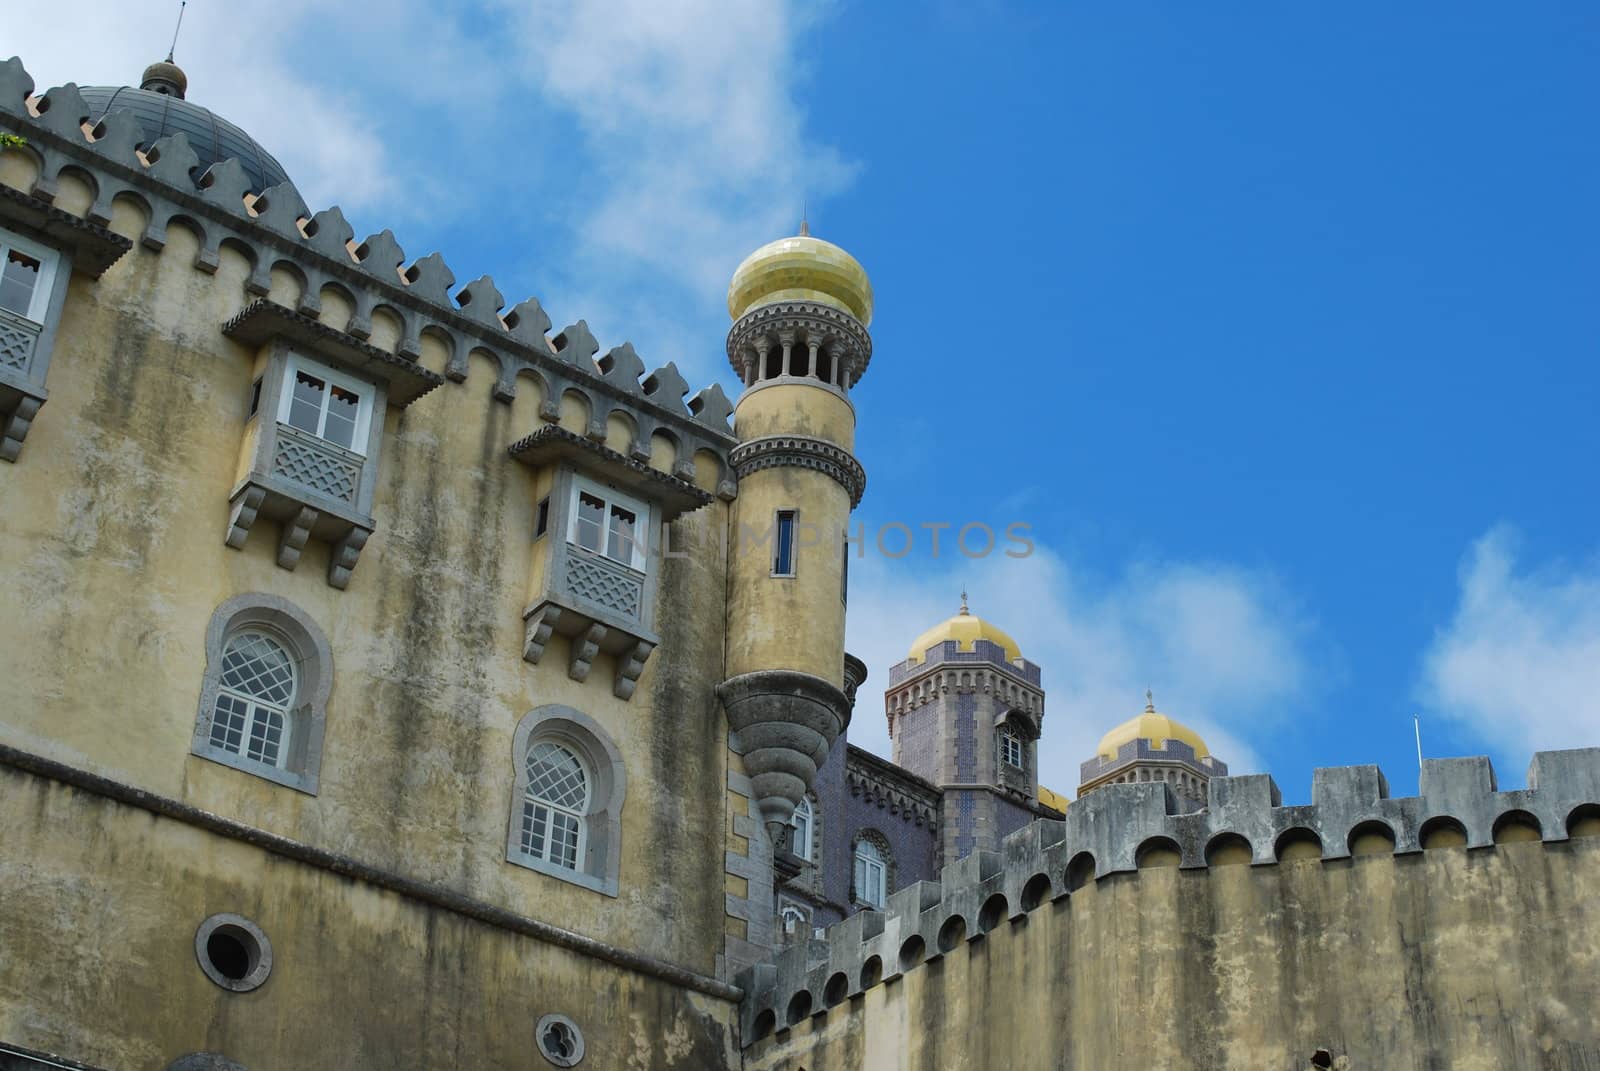 Arabic details in Pena Palace in Sintra, Portugal by luissantos84